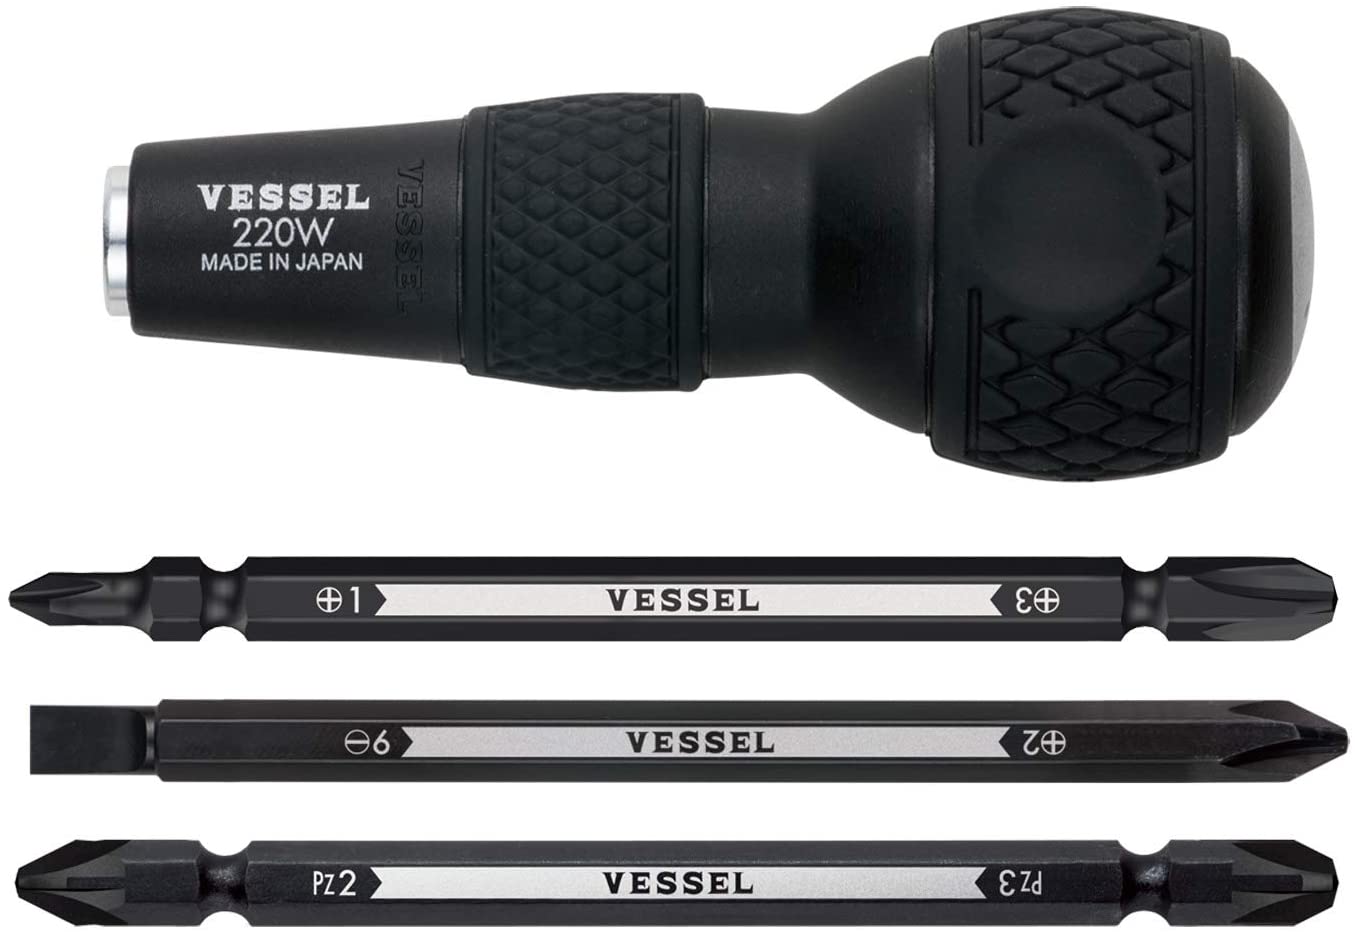 VESSEL BALL GRIP 1/4" Hex. Bit Interchangeable Screwdriver Made in Japan 220W3J1 ($13.99 w/ Free Prime Ship) at Amazon